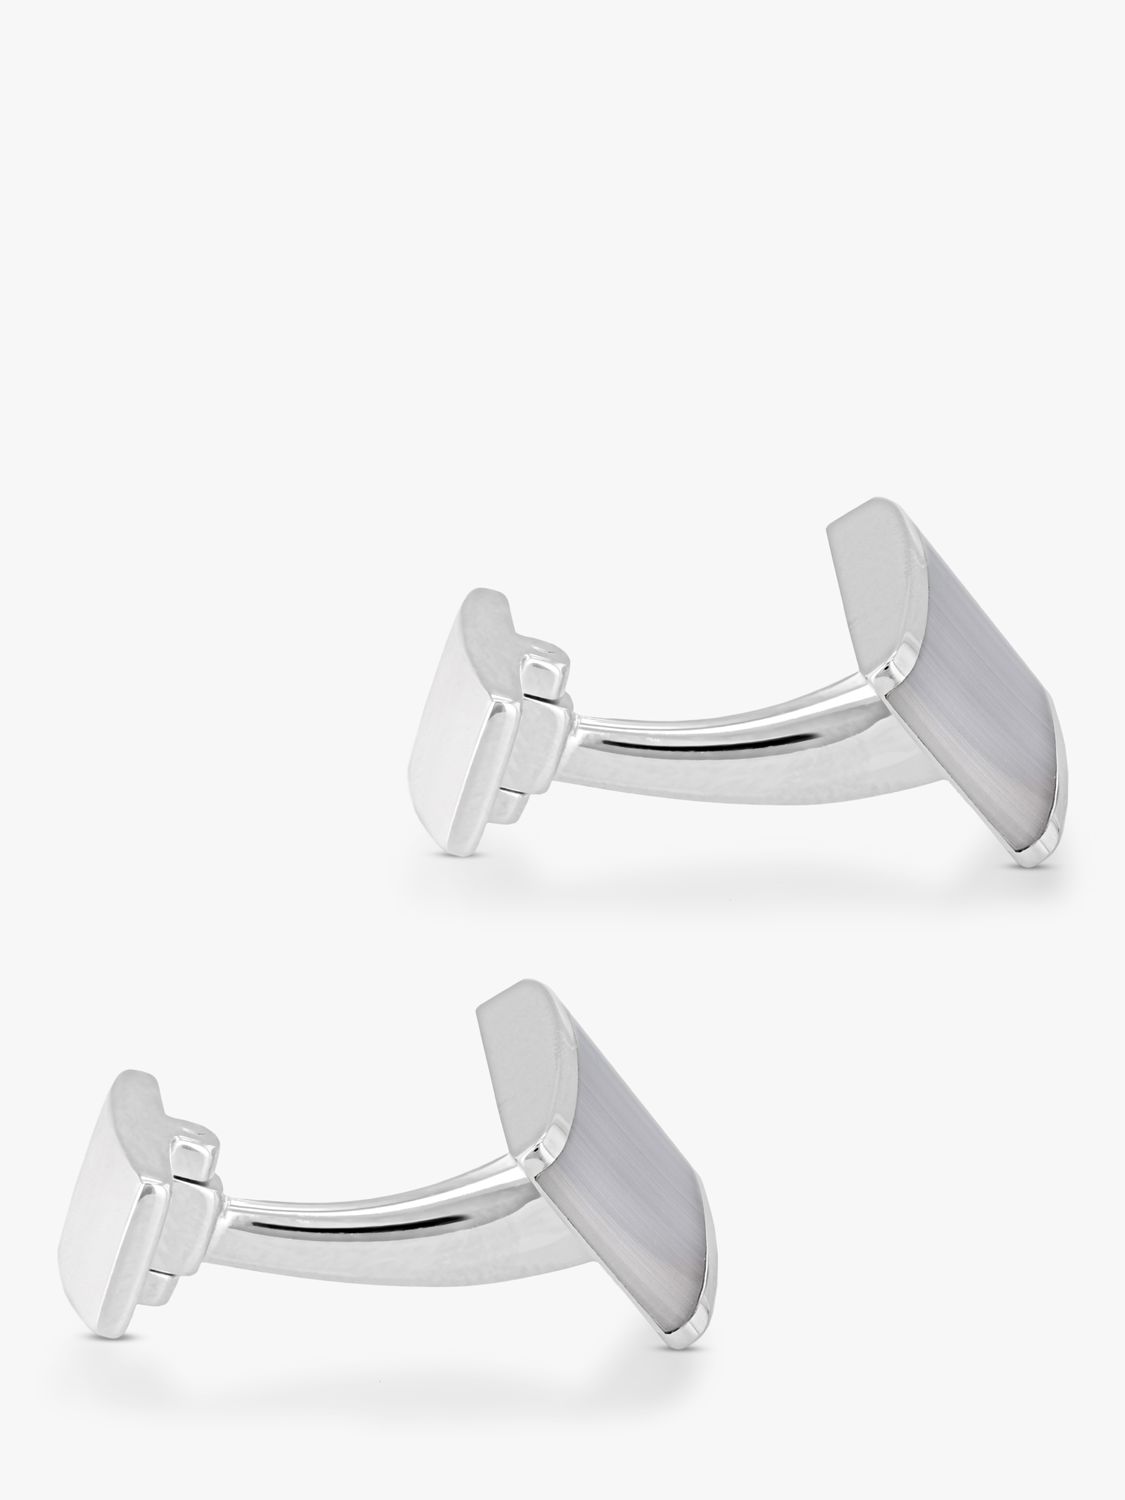 Hoxton London Cats Eye Curved Rectangle Cufflinks, Silver/Grey